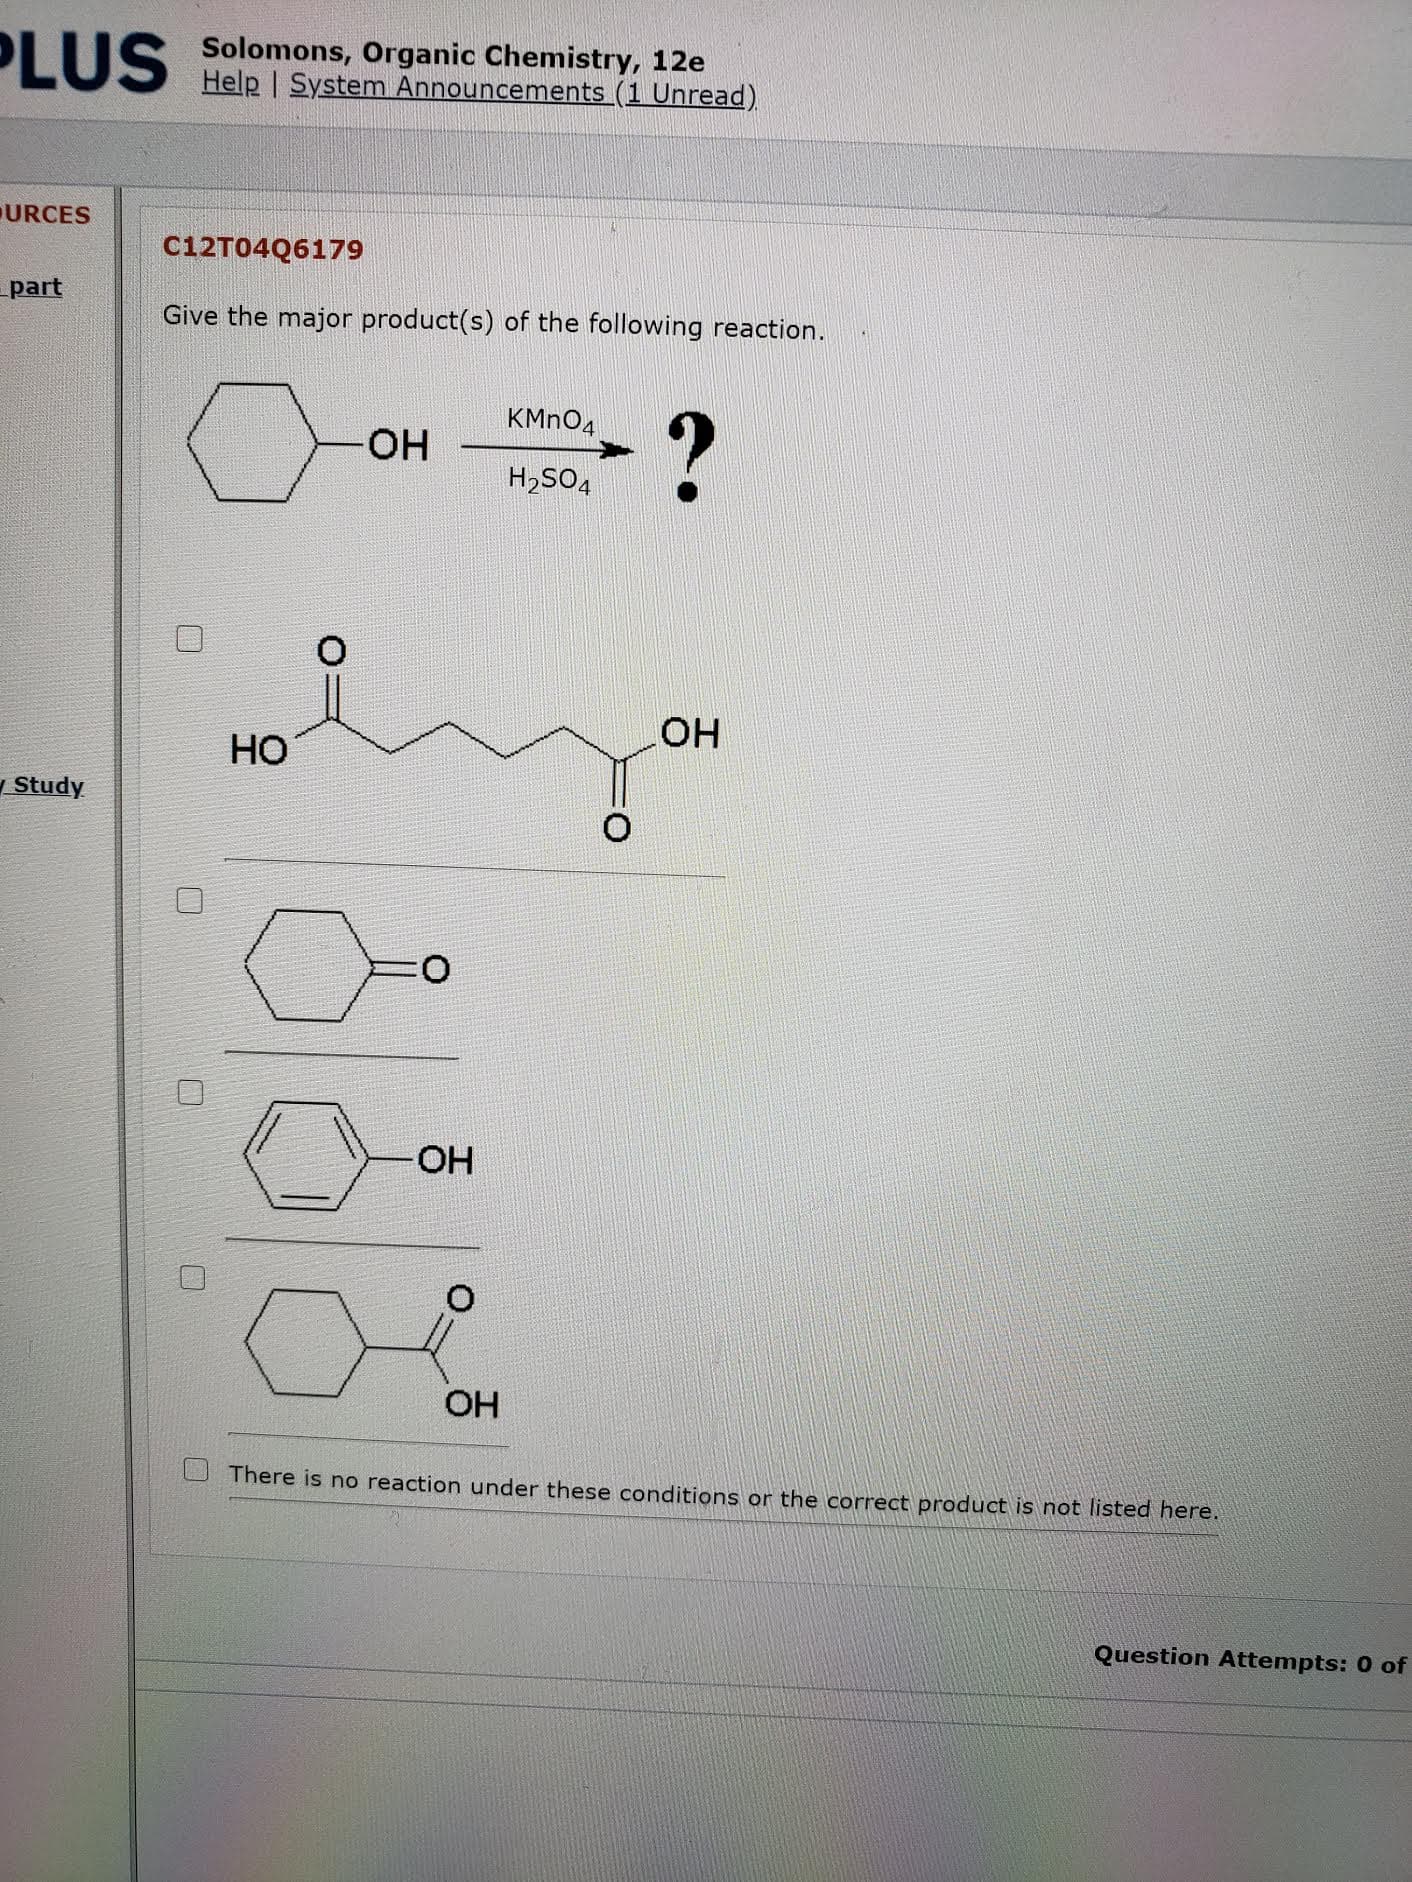 Give the major product(s) of the following reaction.
KMNO4
-HO-
H2SO4
